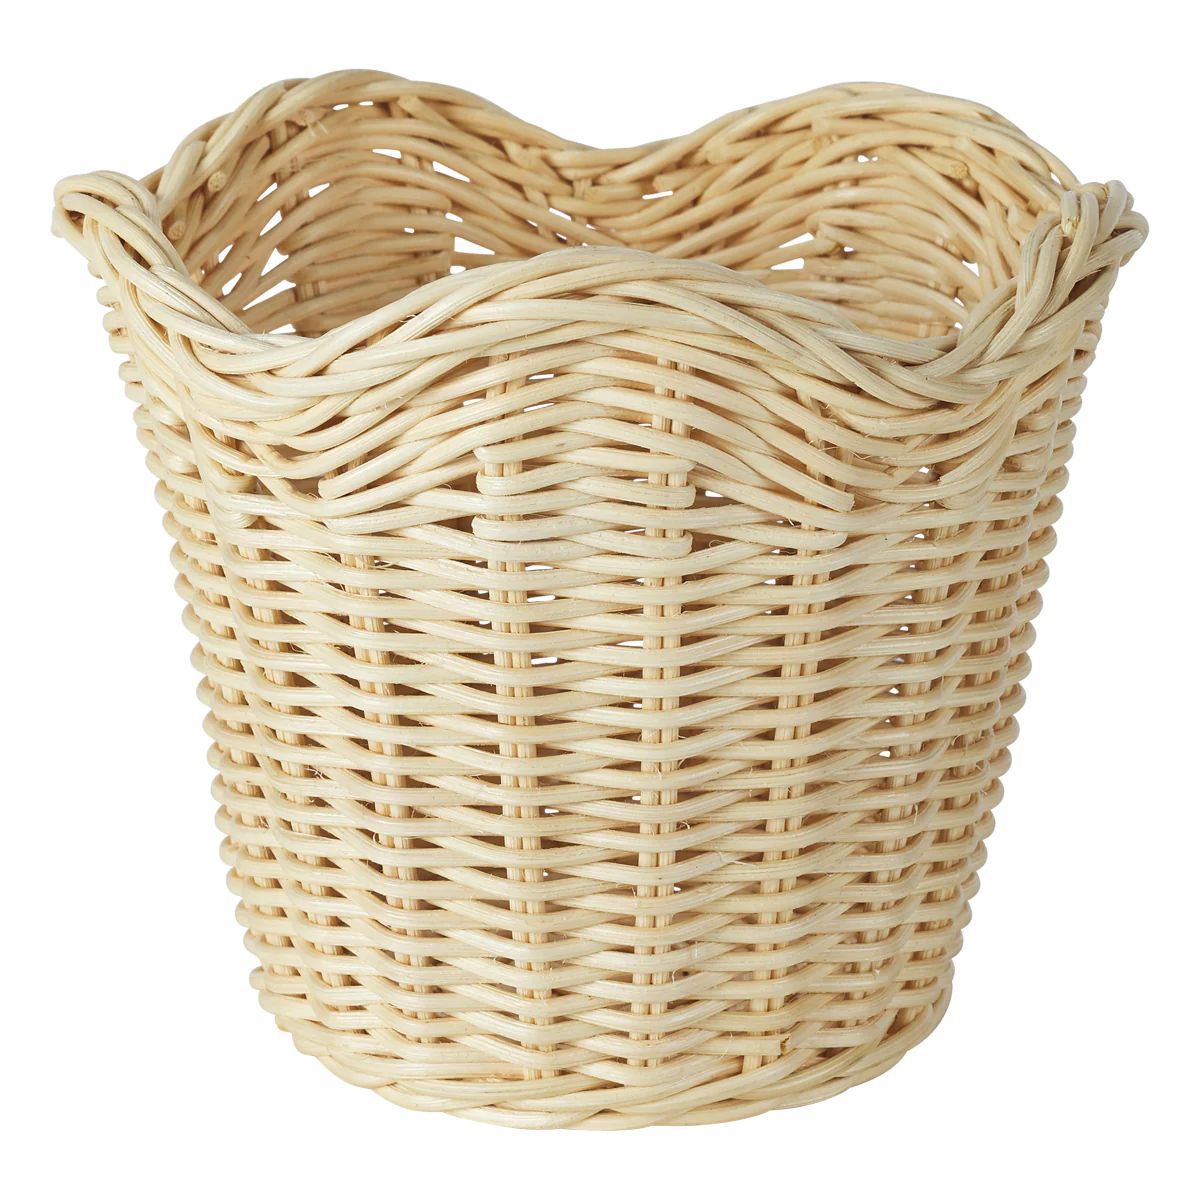 Wavy Wicker Orchid Baskets Small, Set of 3 | Amanda Lindroth